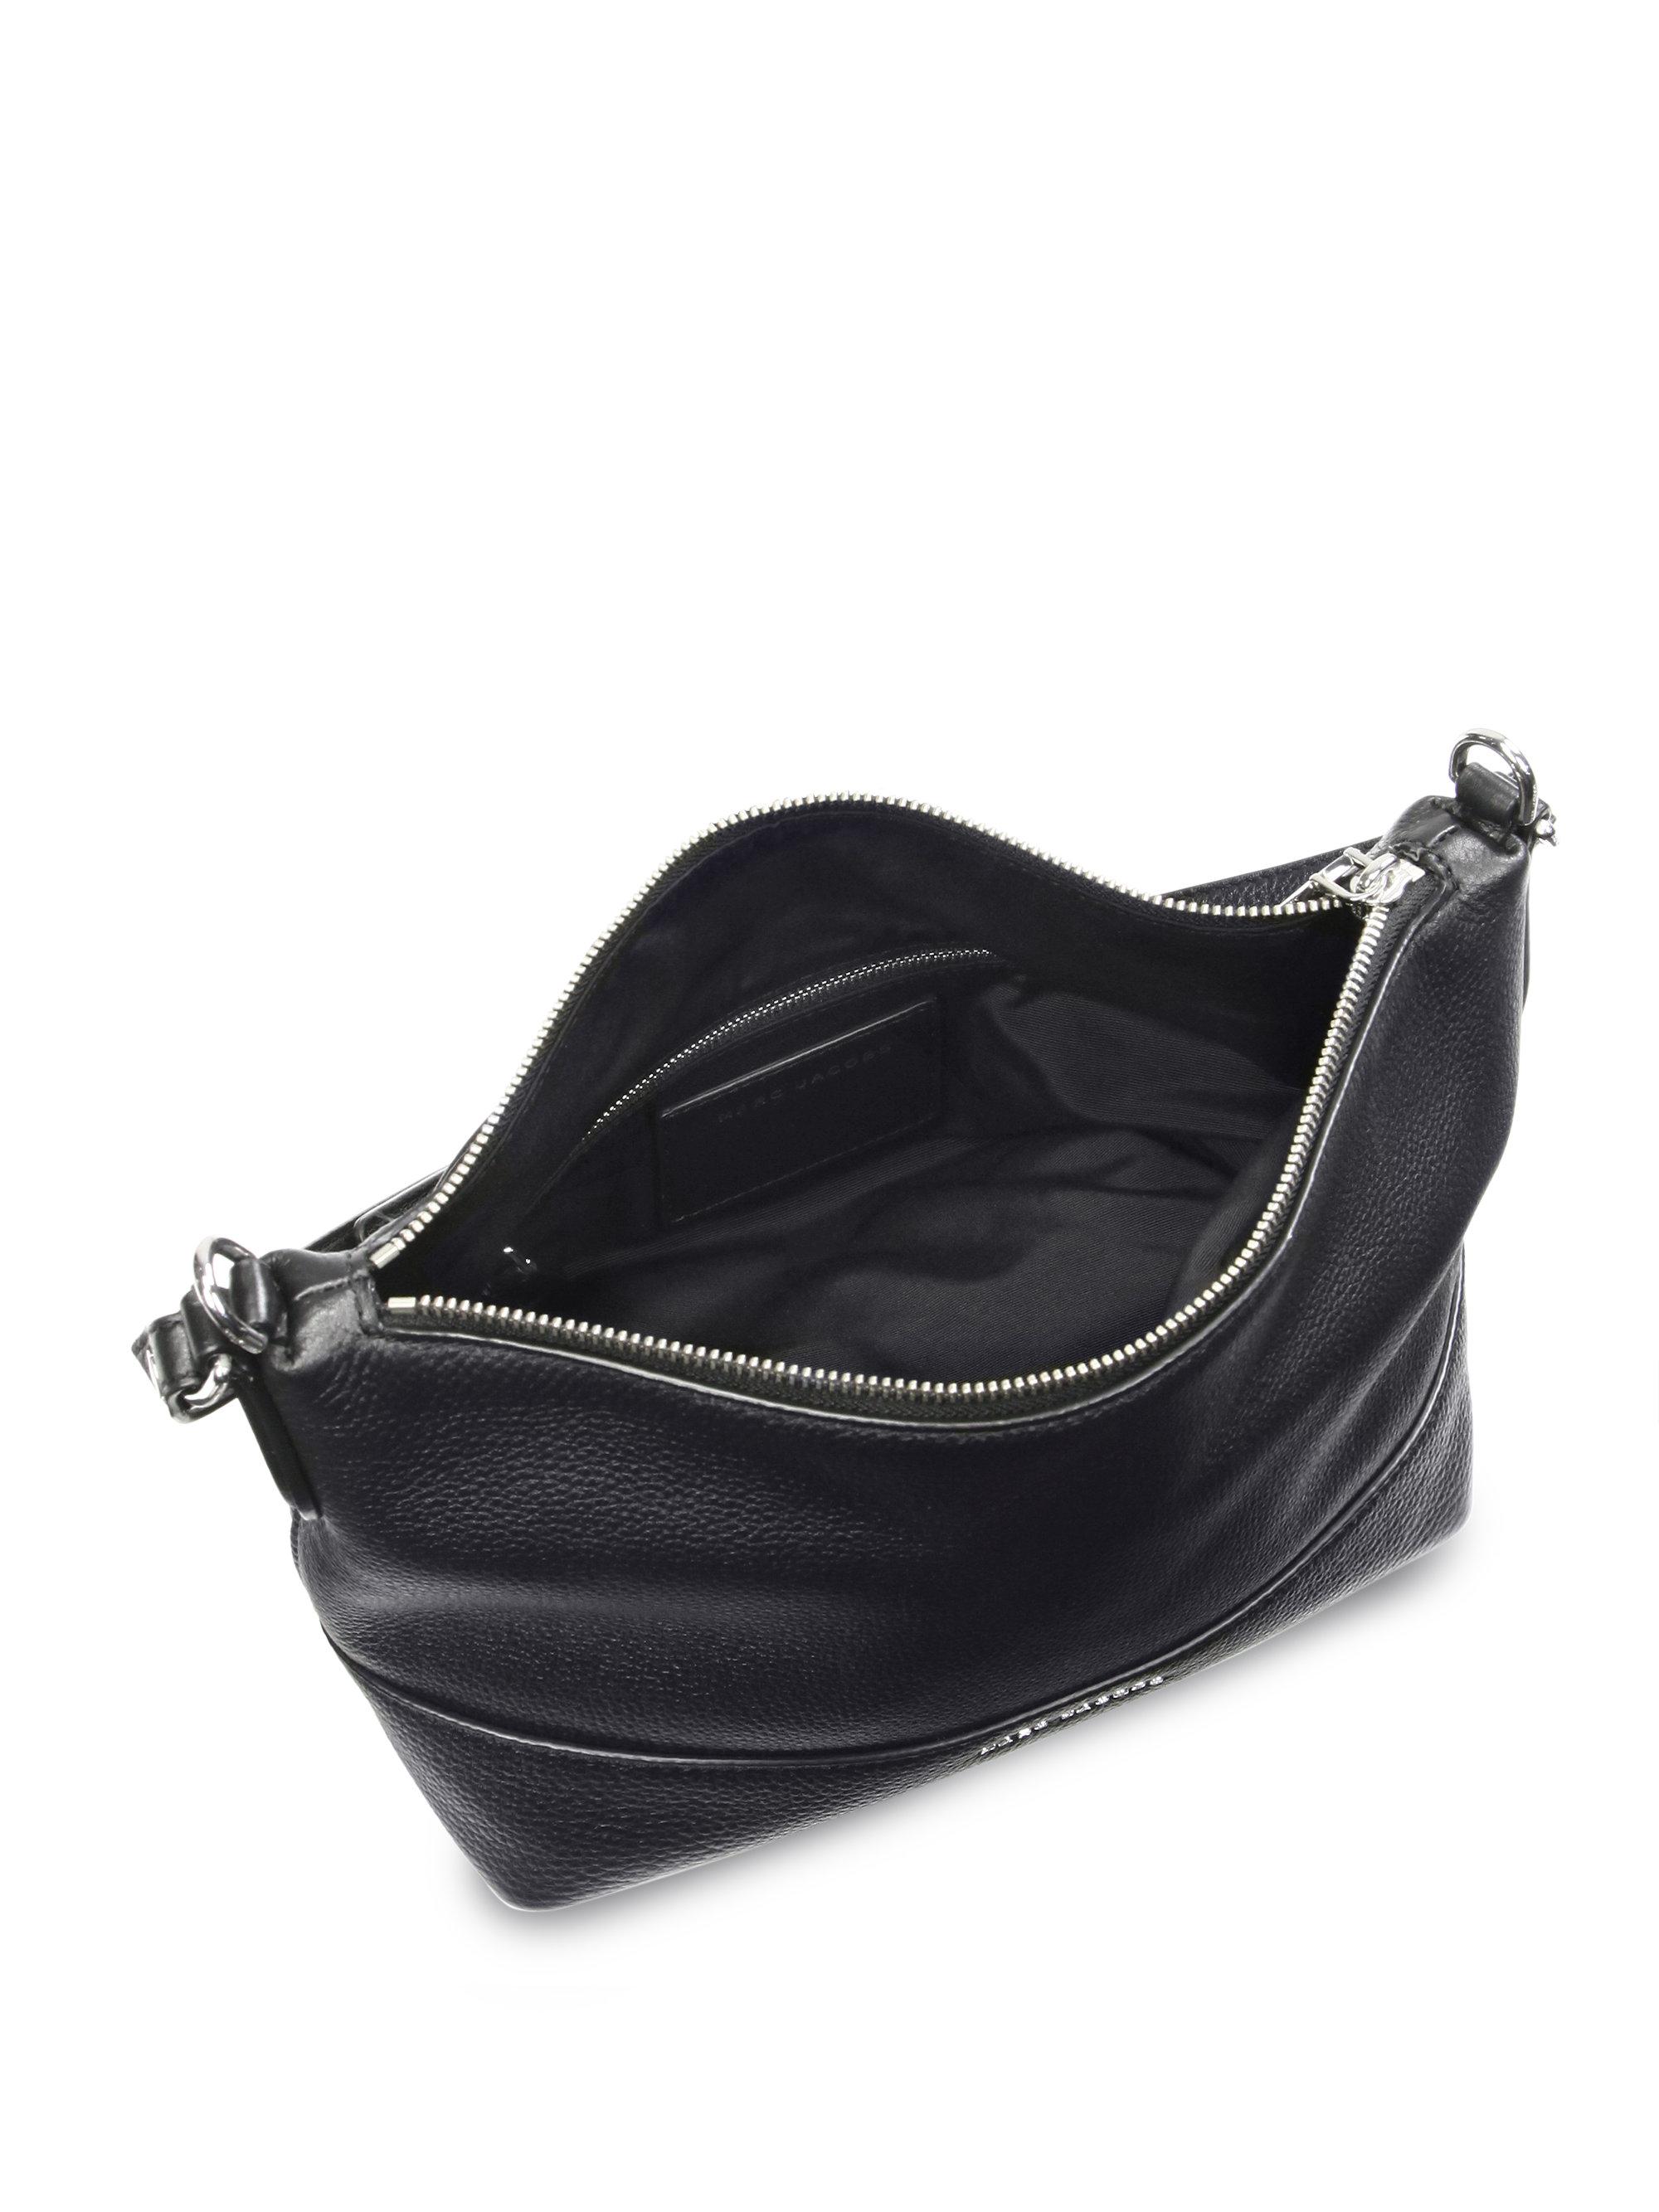 Marc Jacobs Small Grip Leather Crossbody Bag in Black - Lyst